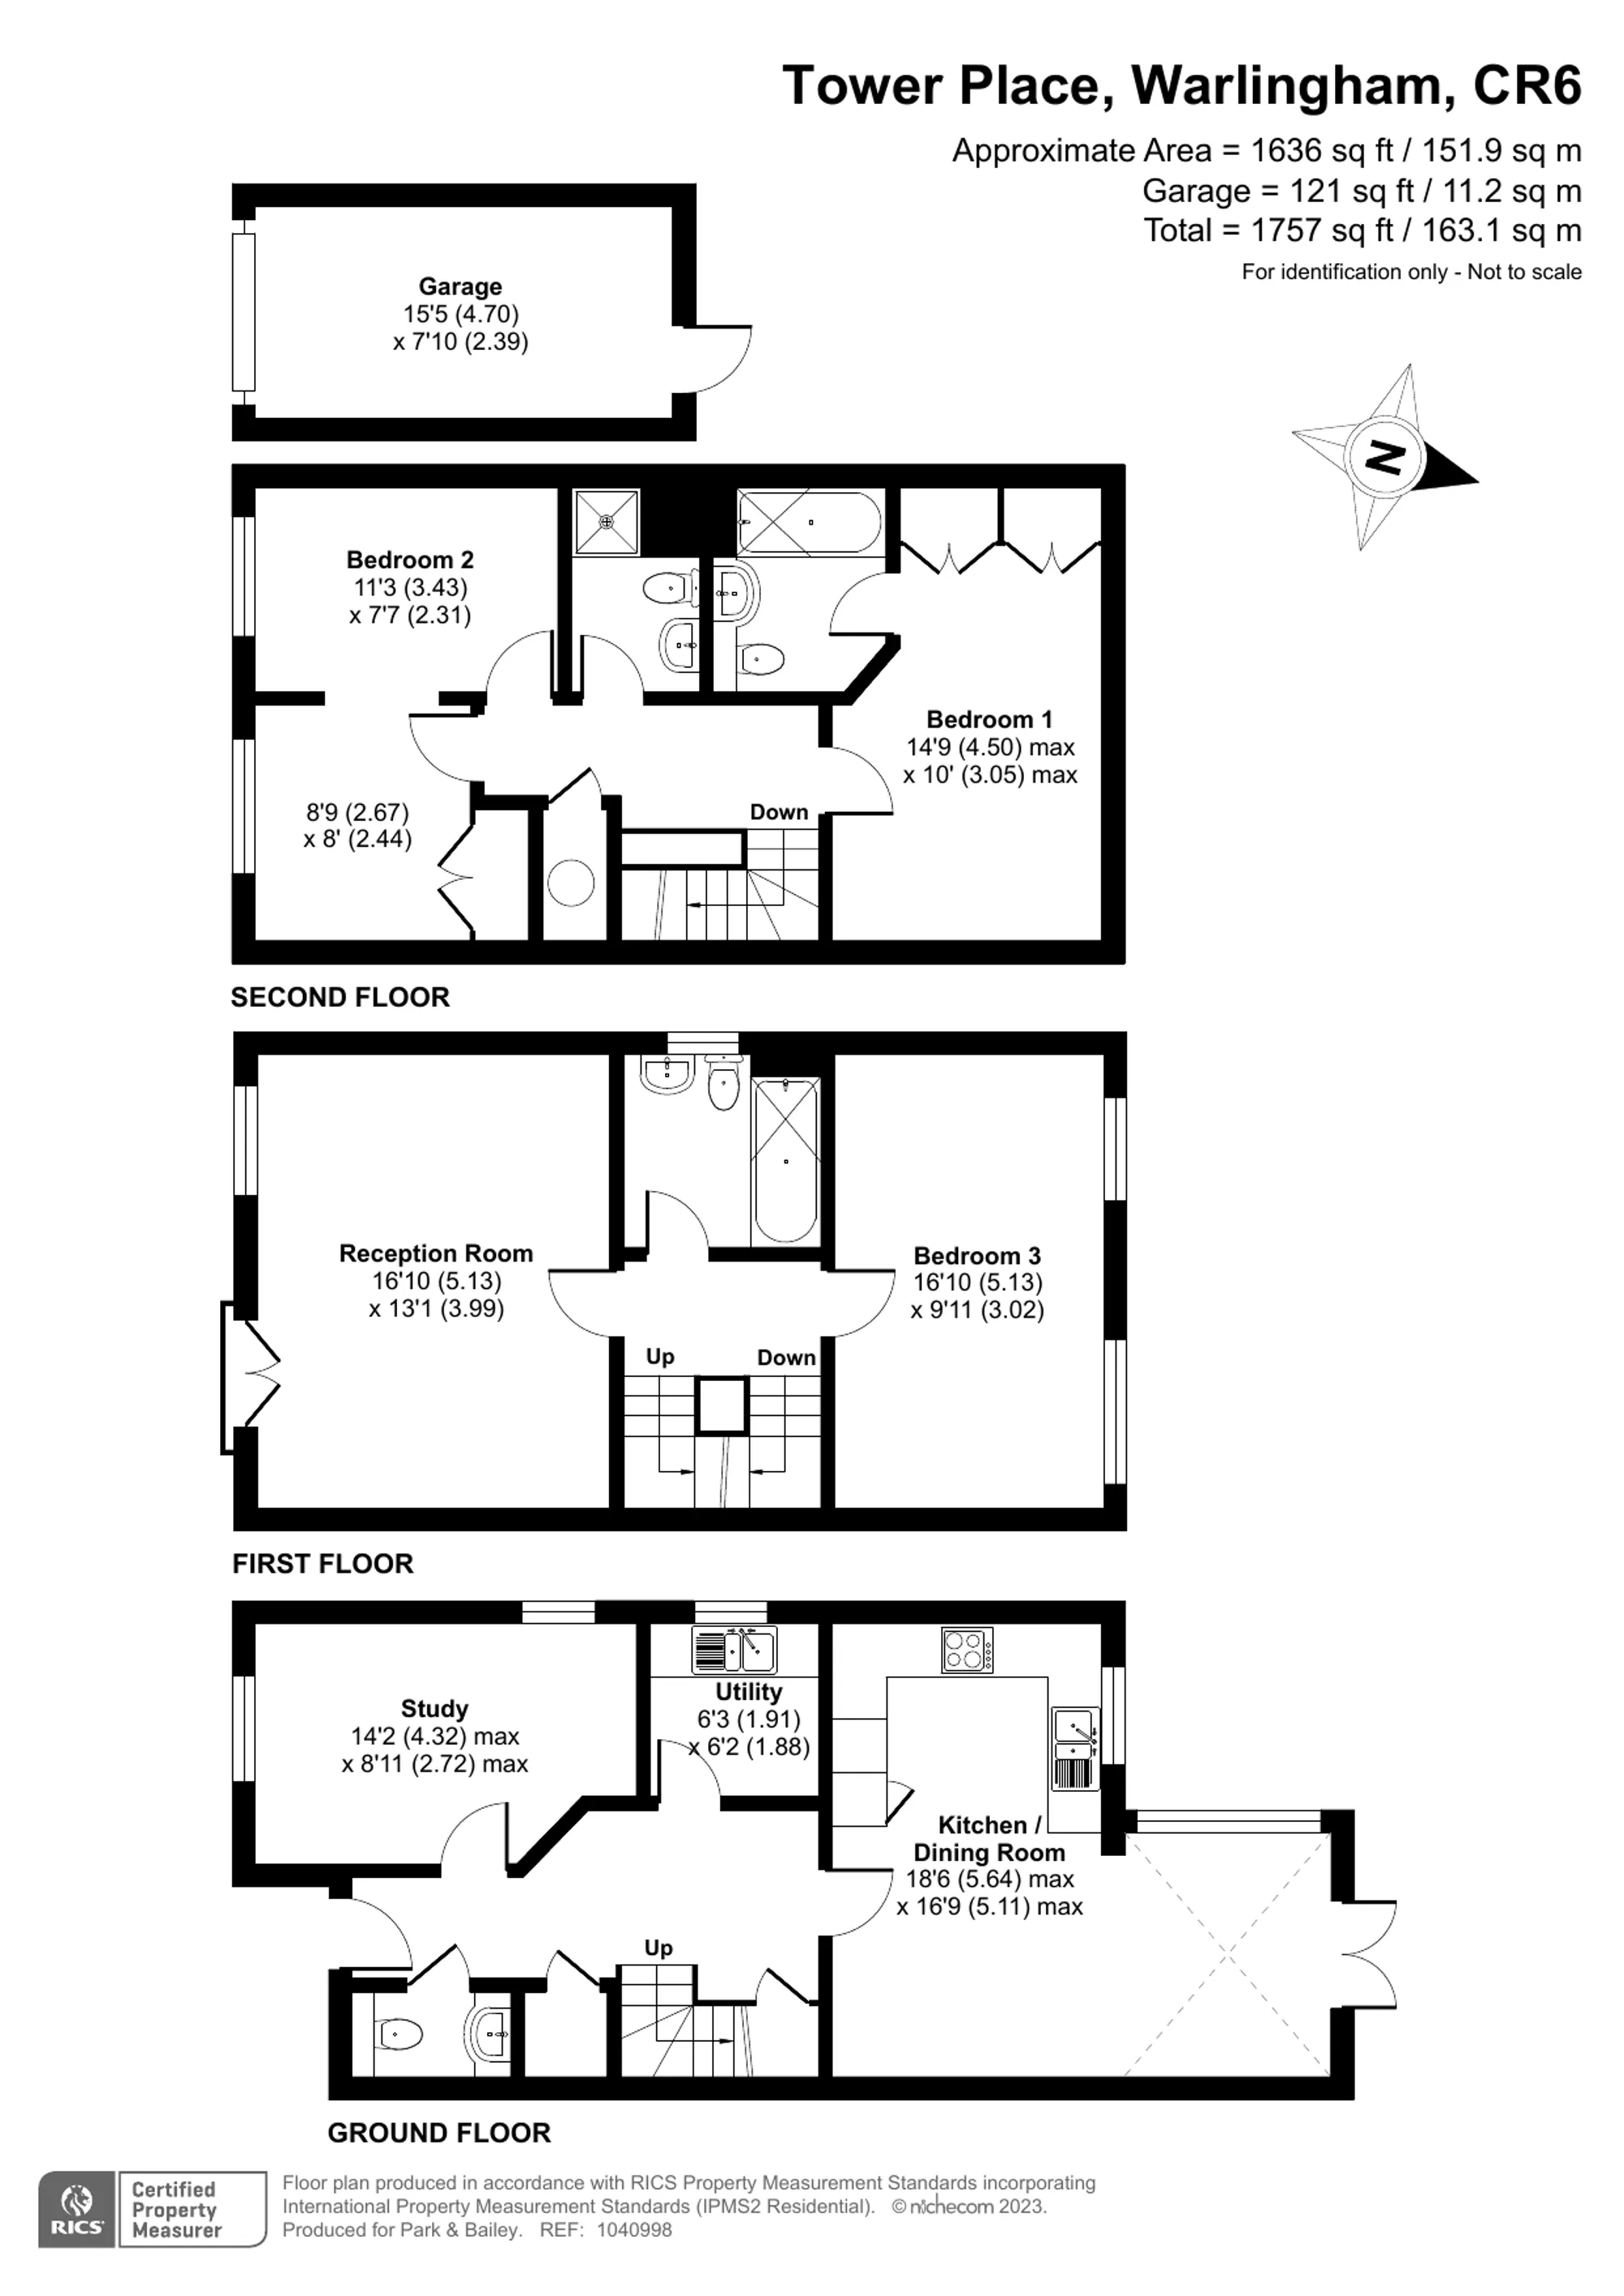 4 bed end of terrace house for sale in Tower Place, Warlingham - Property floorplan